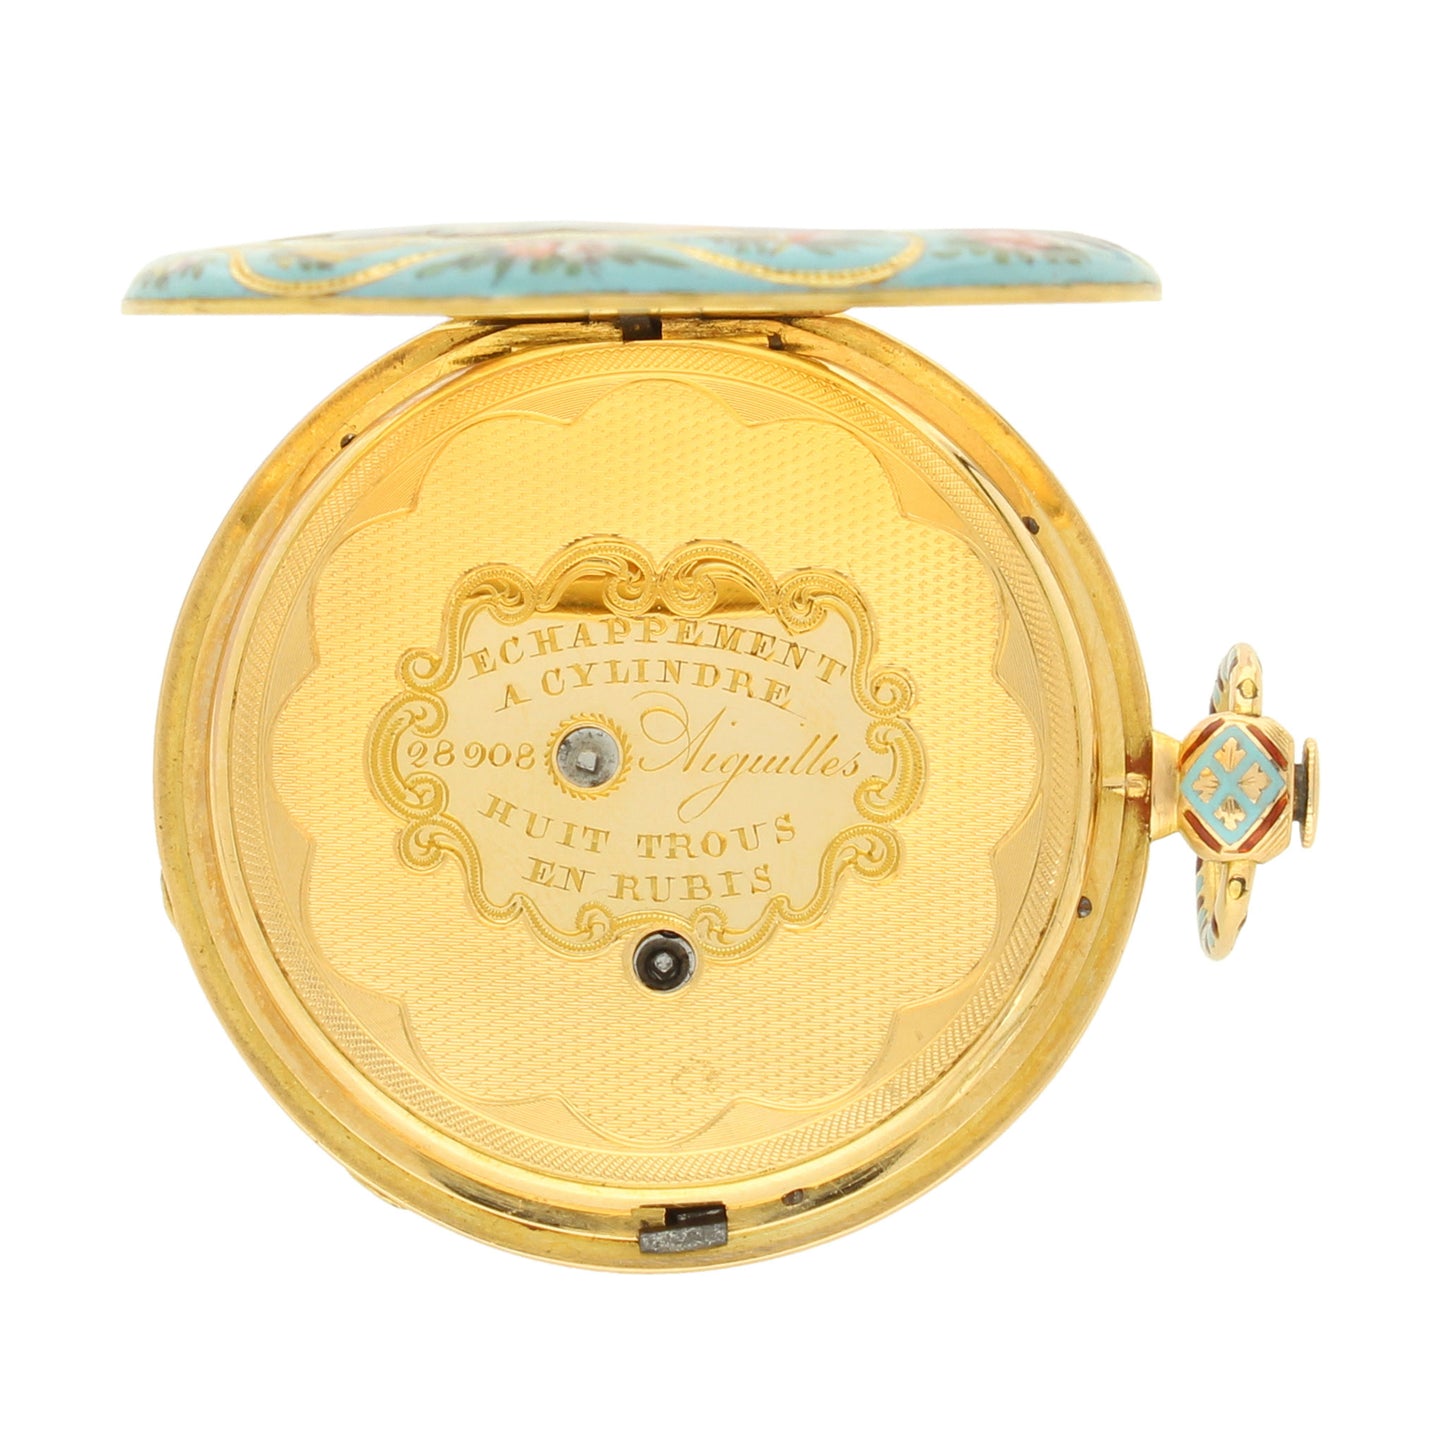 18ct yellow gold and enamel set open face pocket watch, made for the Turkish Market. Made 1840's